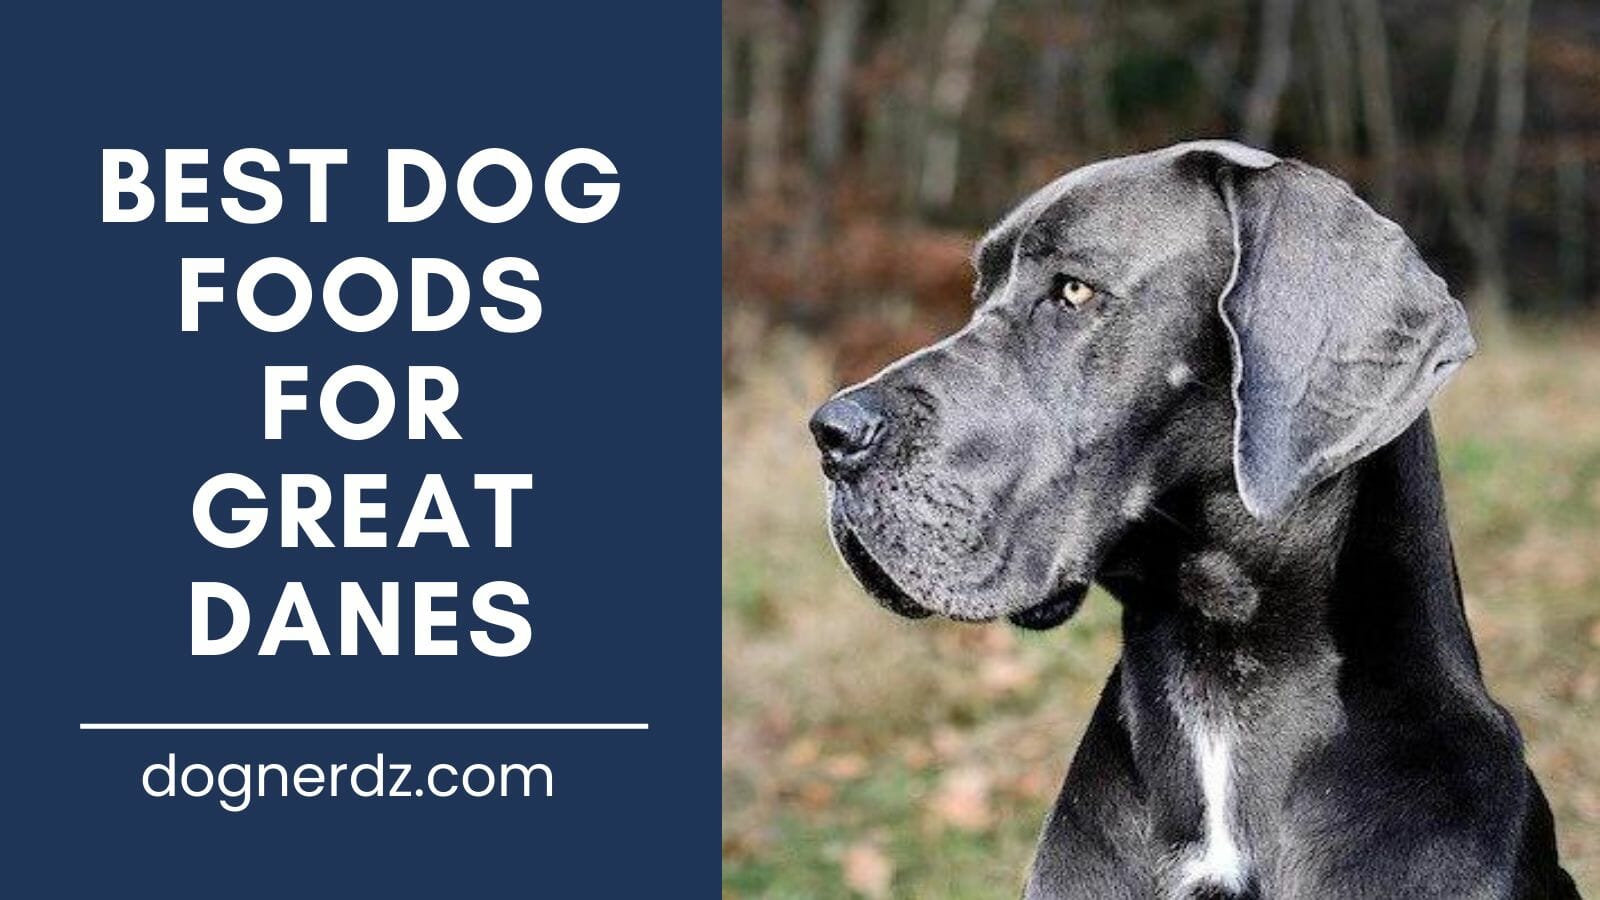 review of the best dog foods for great danes